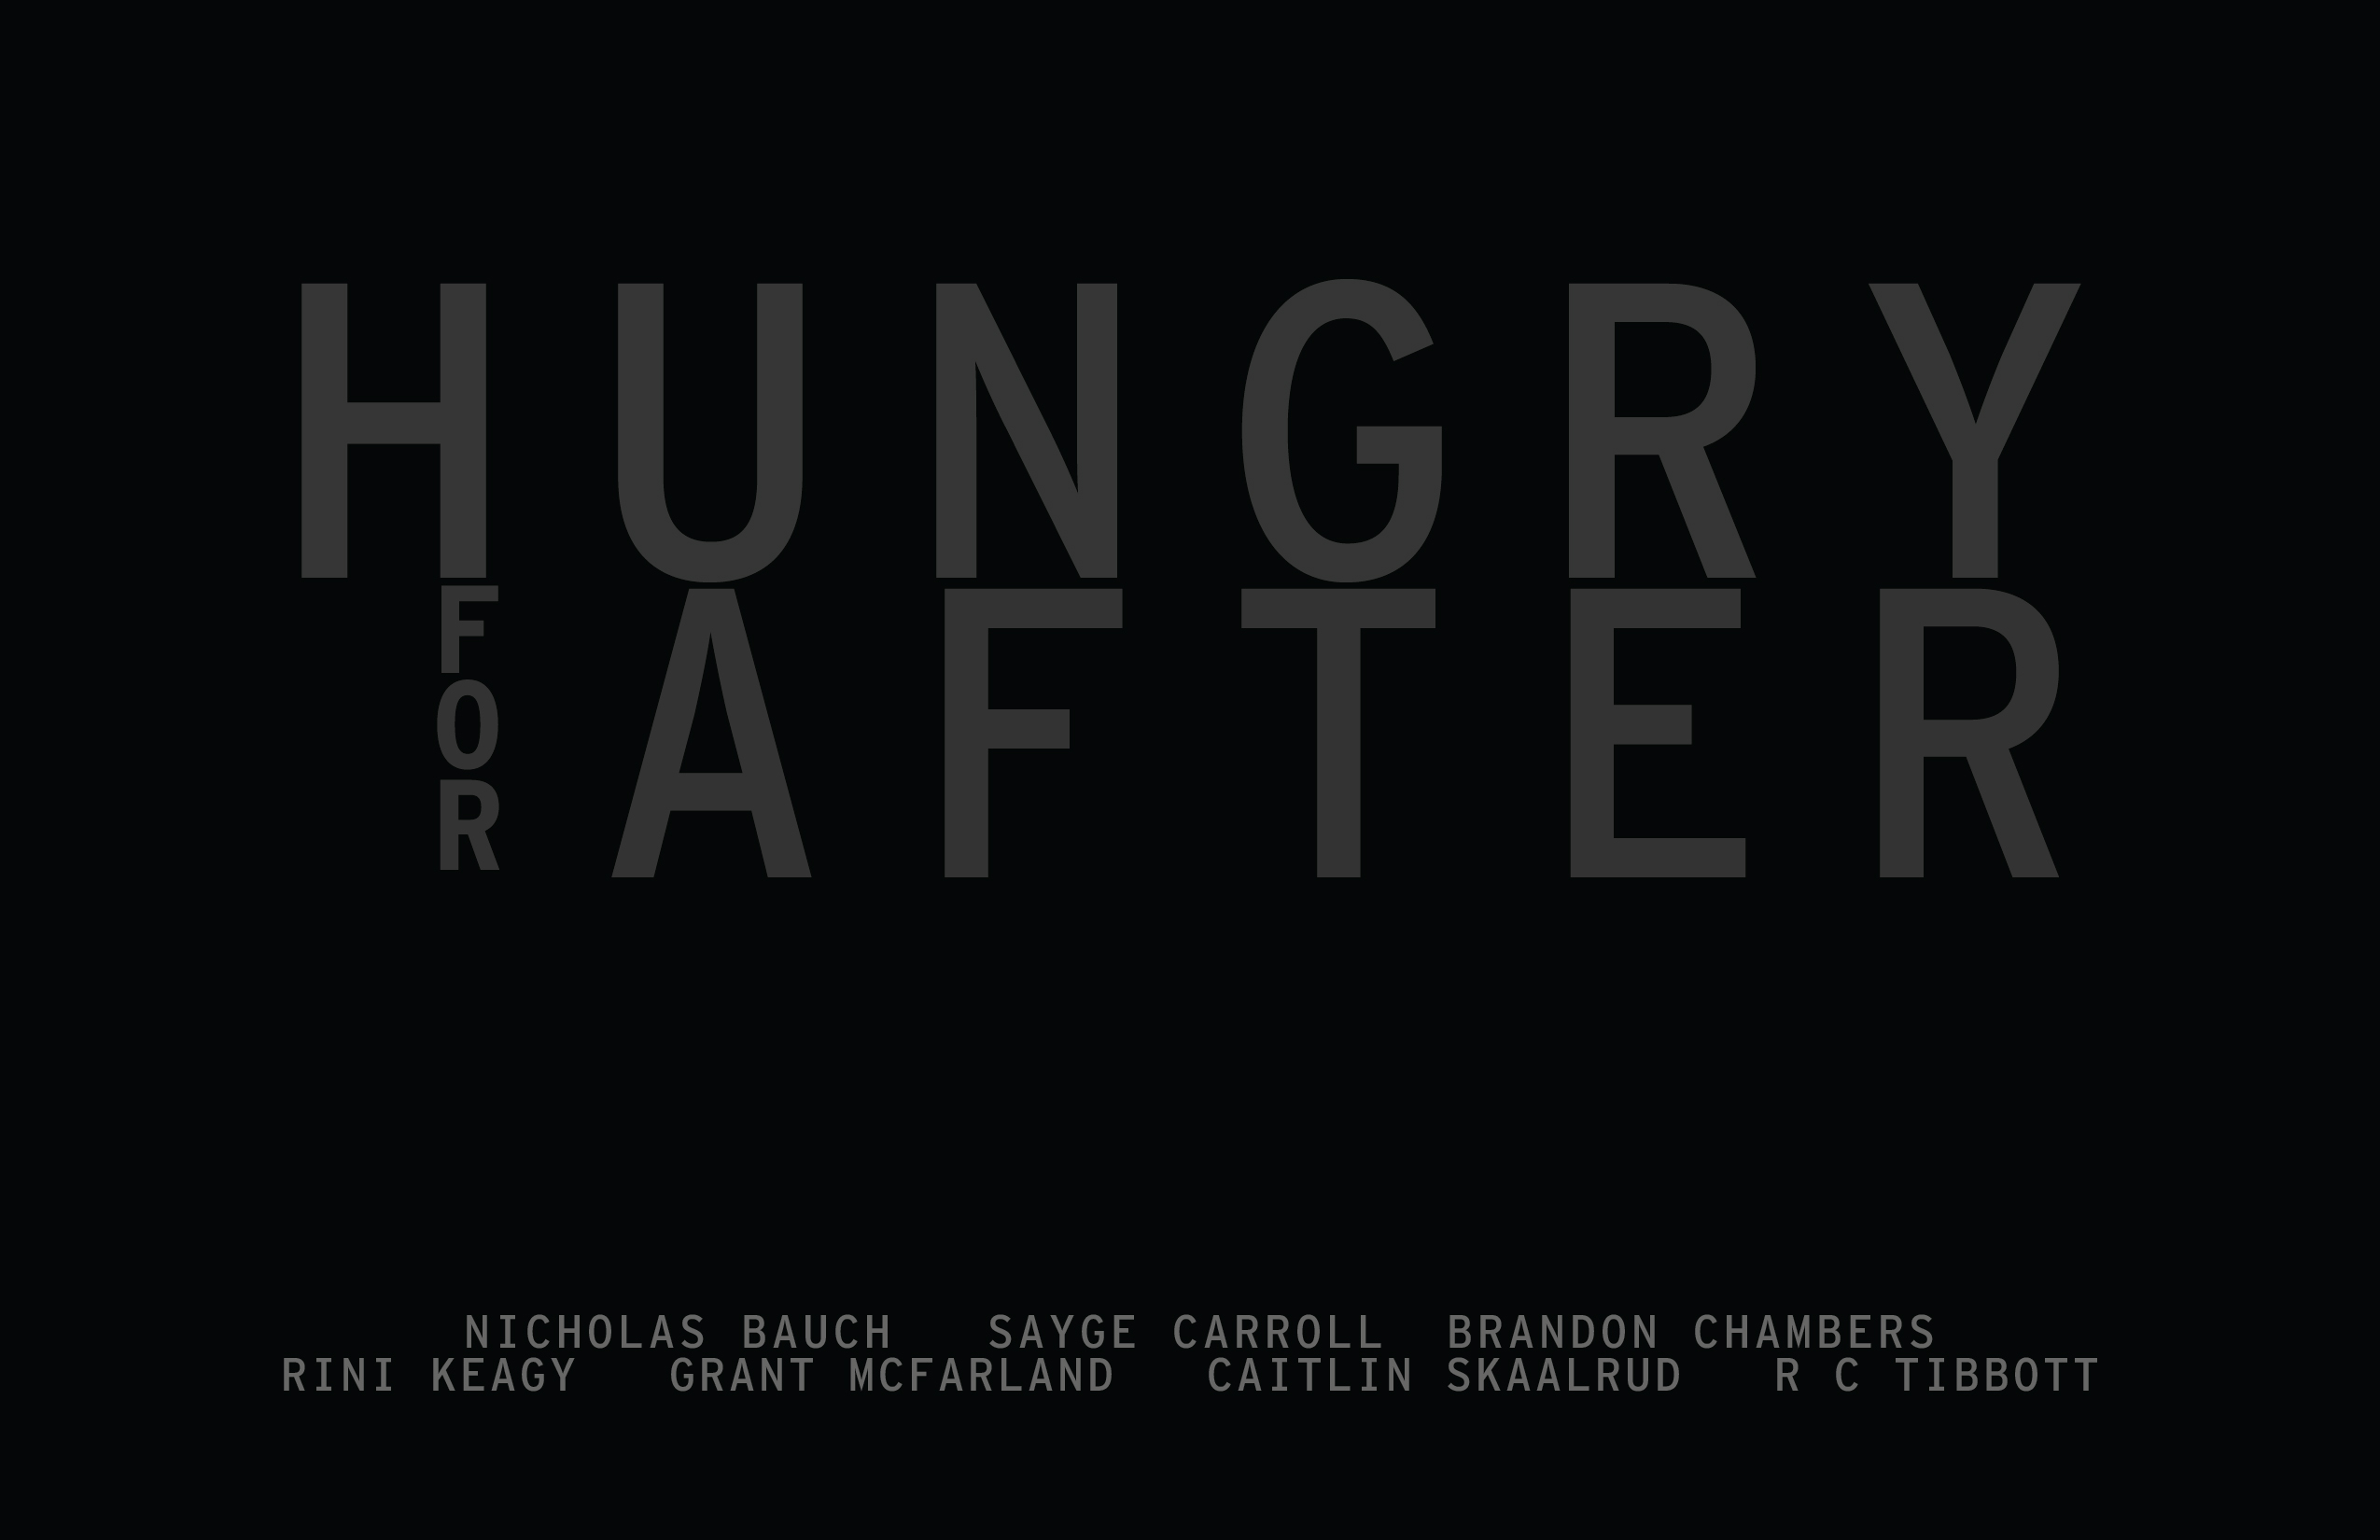 Graphic text for promotion of the MFA thesis exhibition "Hungry For After"